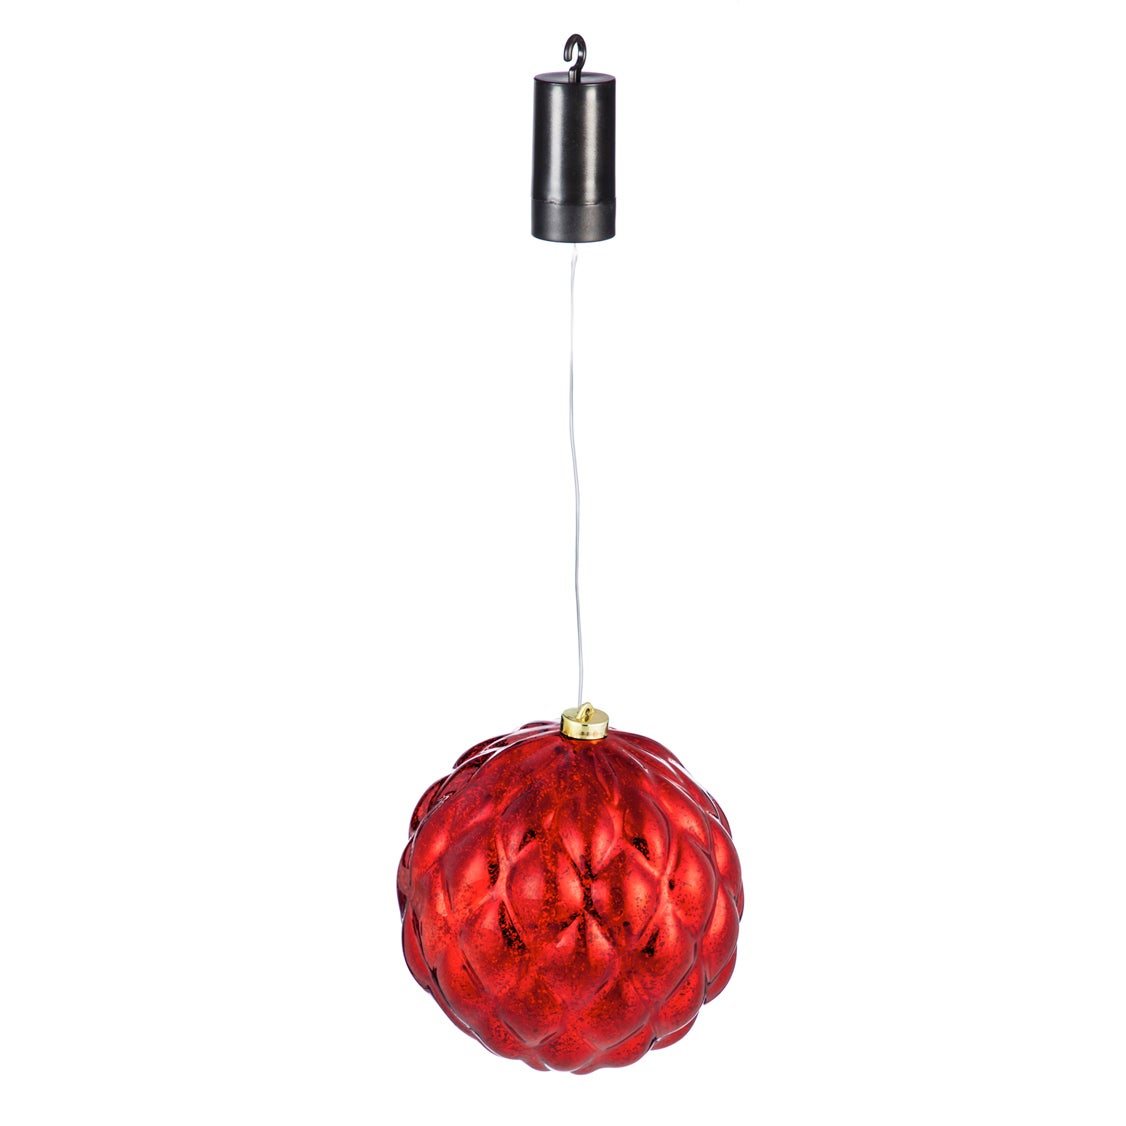 8" Shatterproof Outdoor Safe Battery Operated LED Ball Ornament, Red